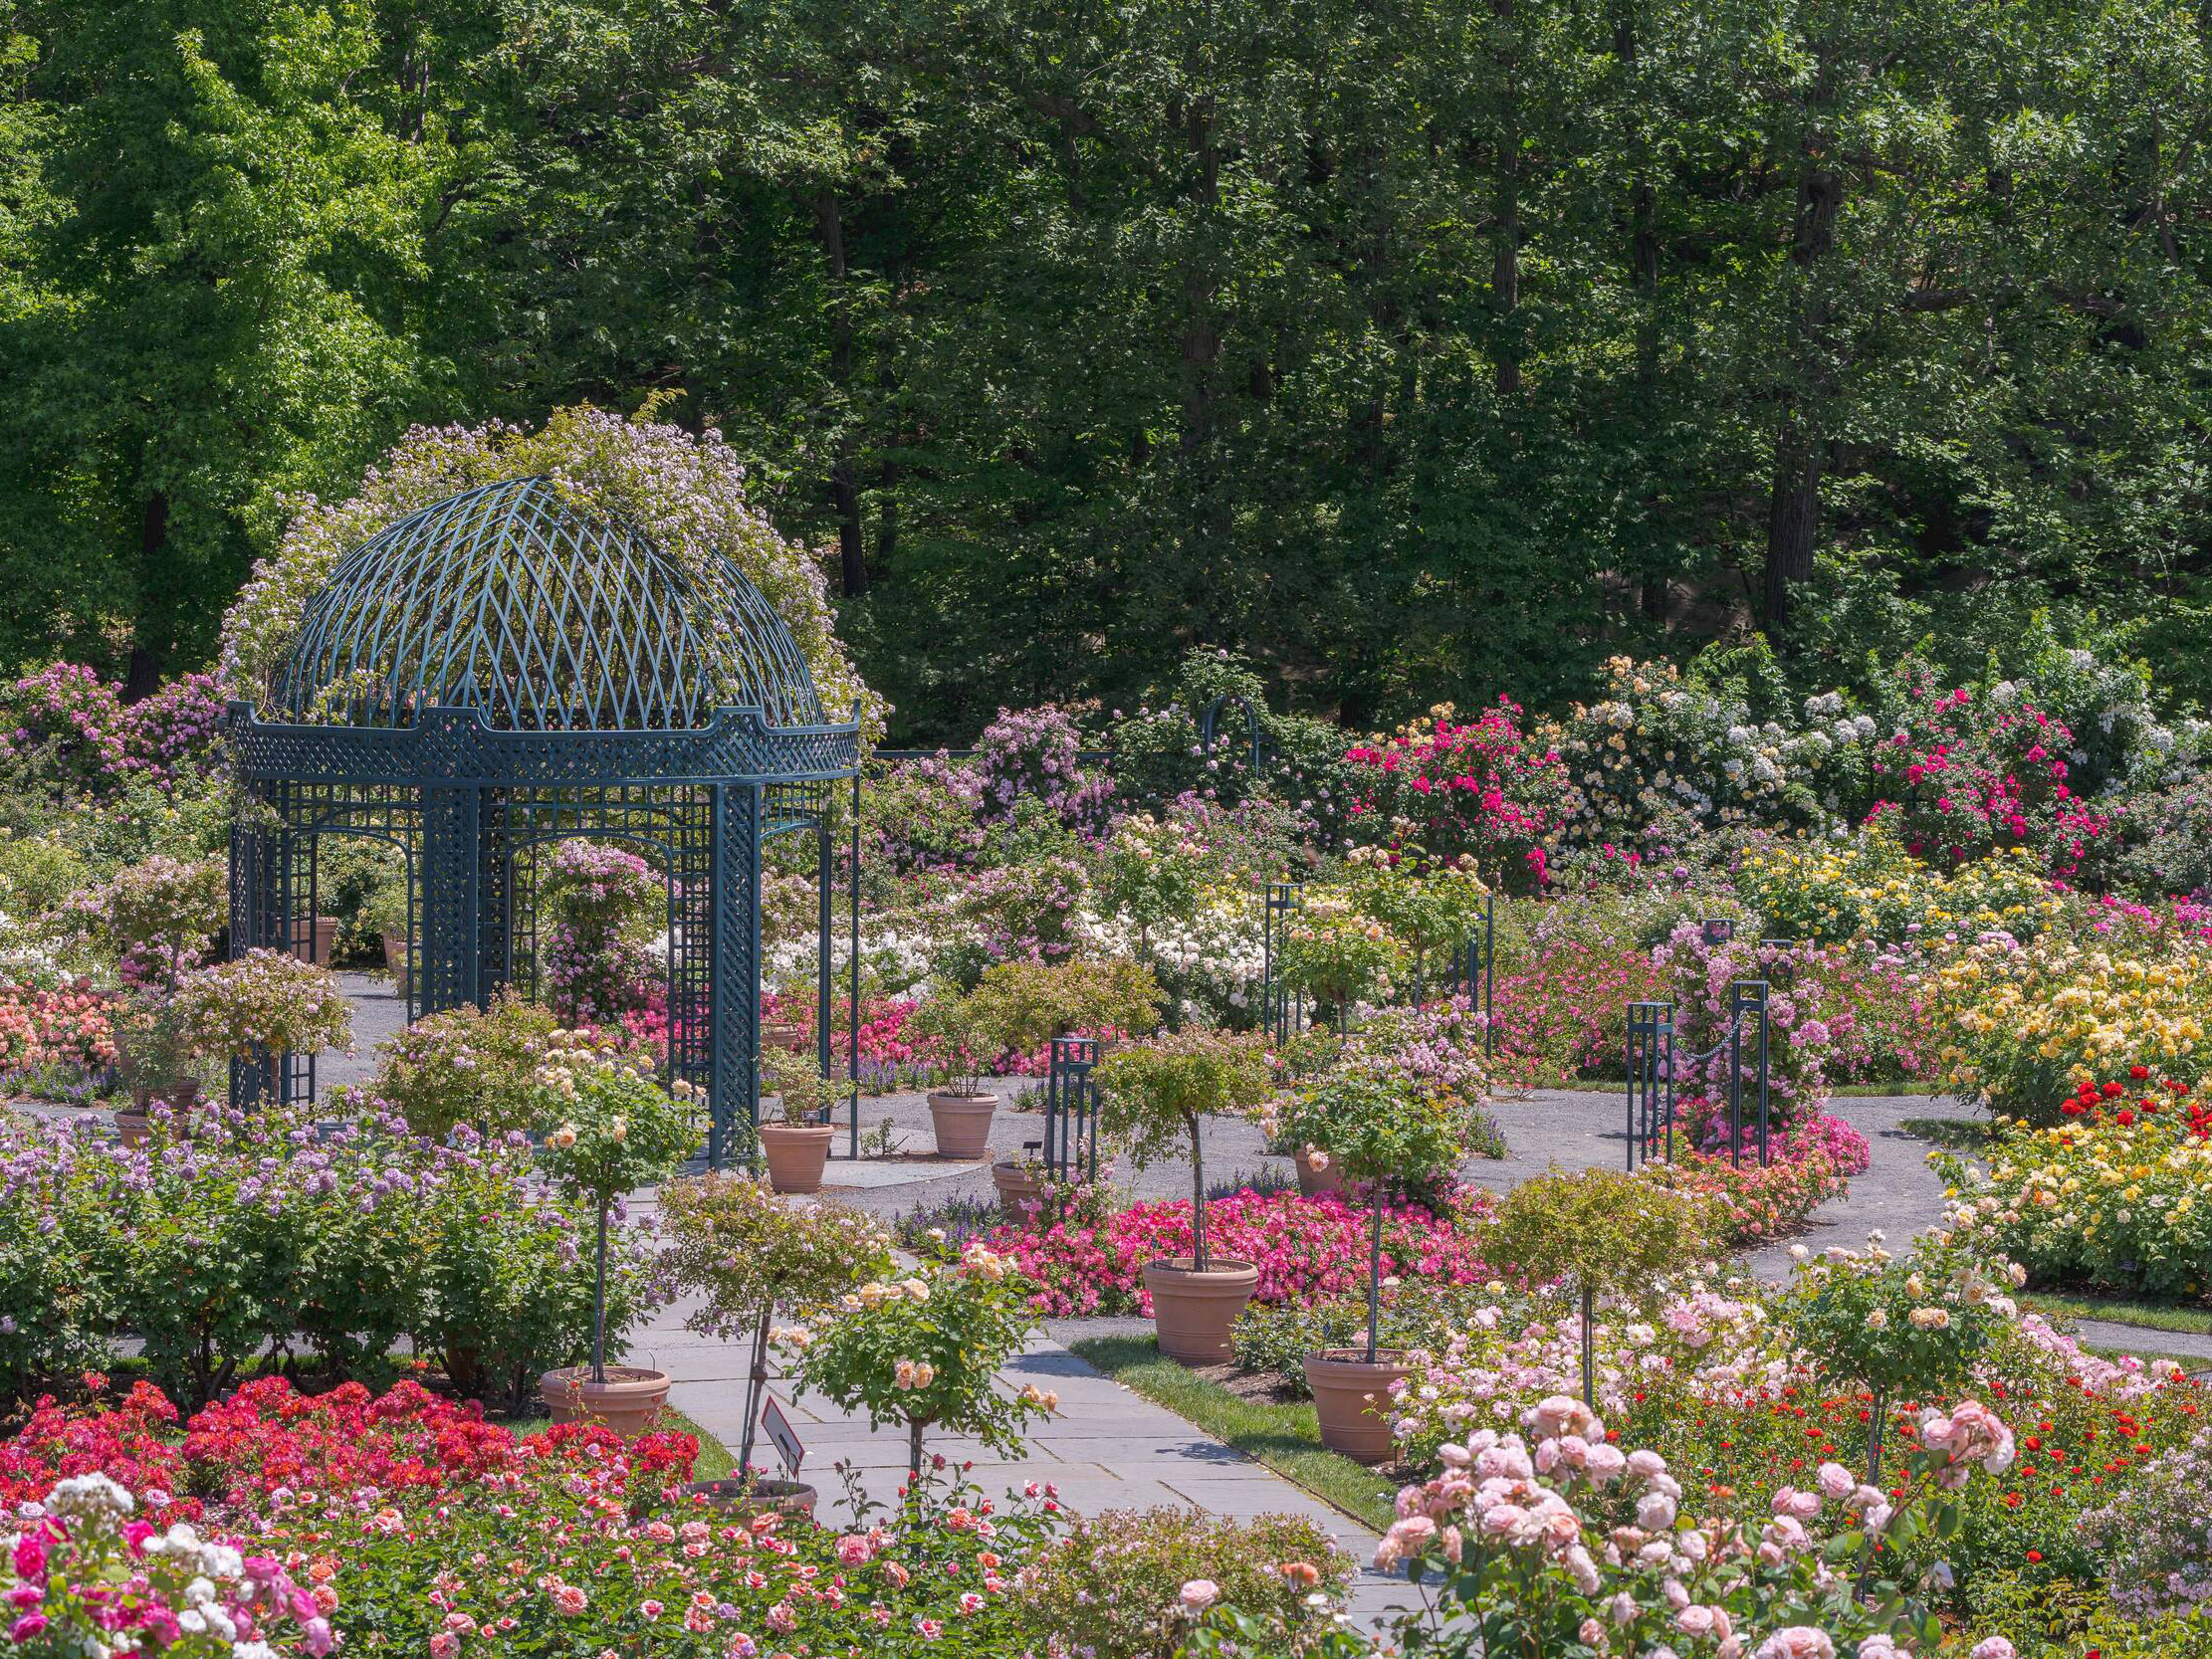 A view of a colorful rose garden in full bloom, with a green pergola in the center